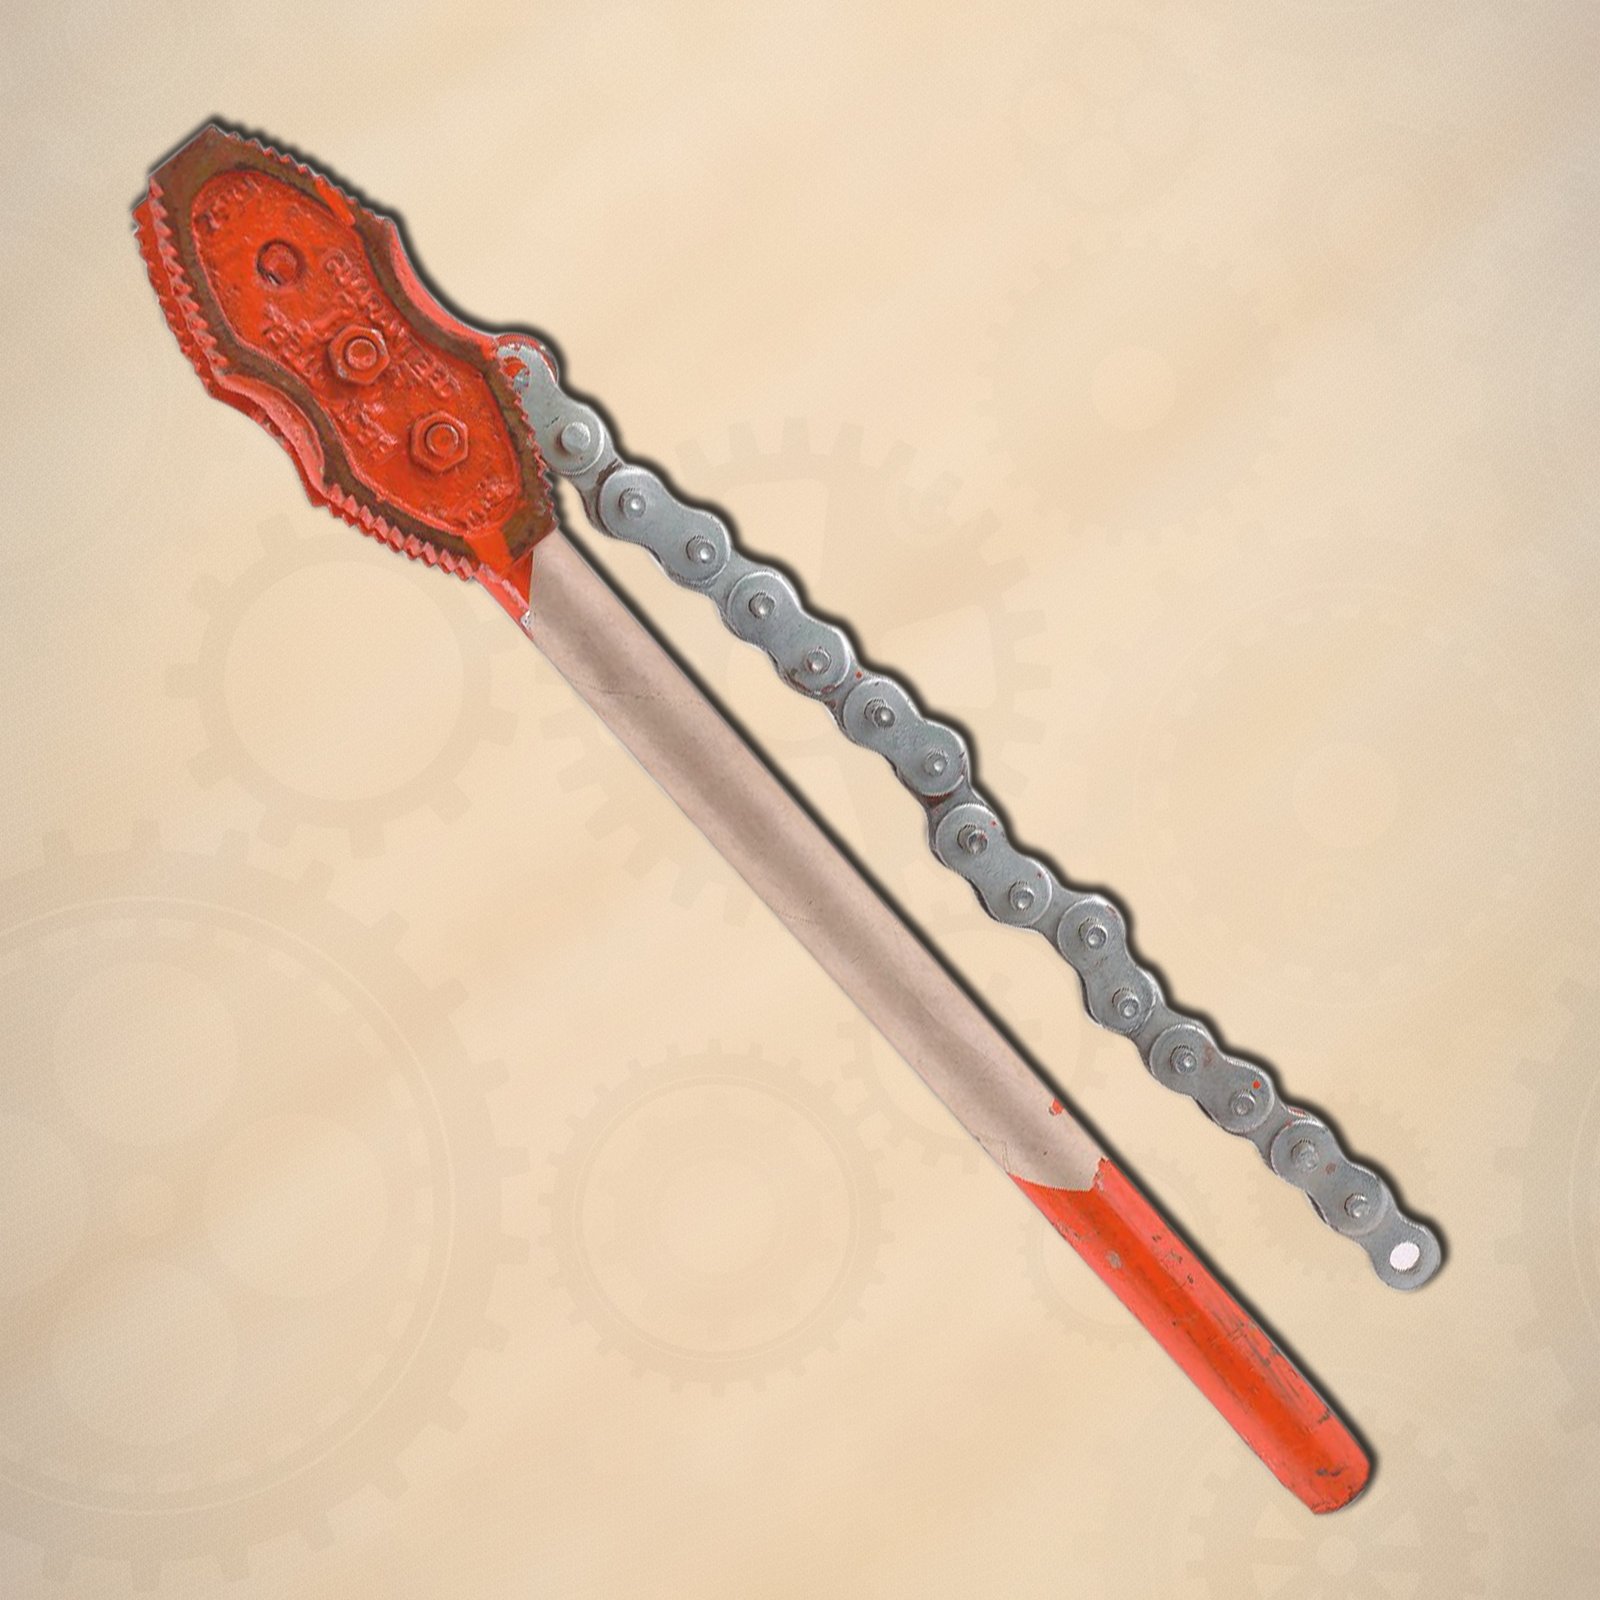 Chain Wrench Manufacturer in India